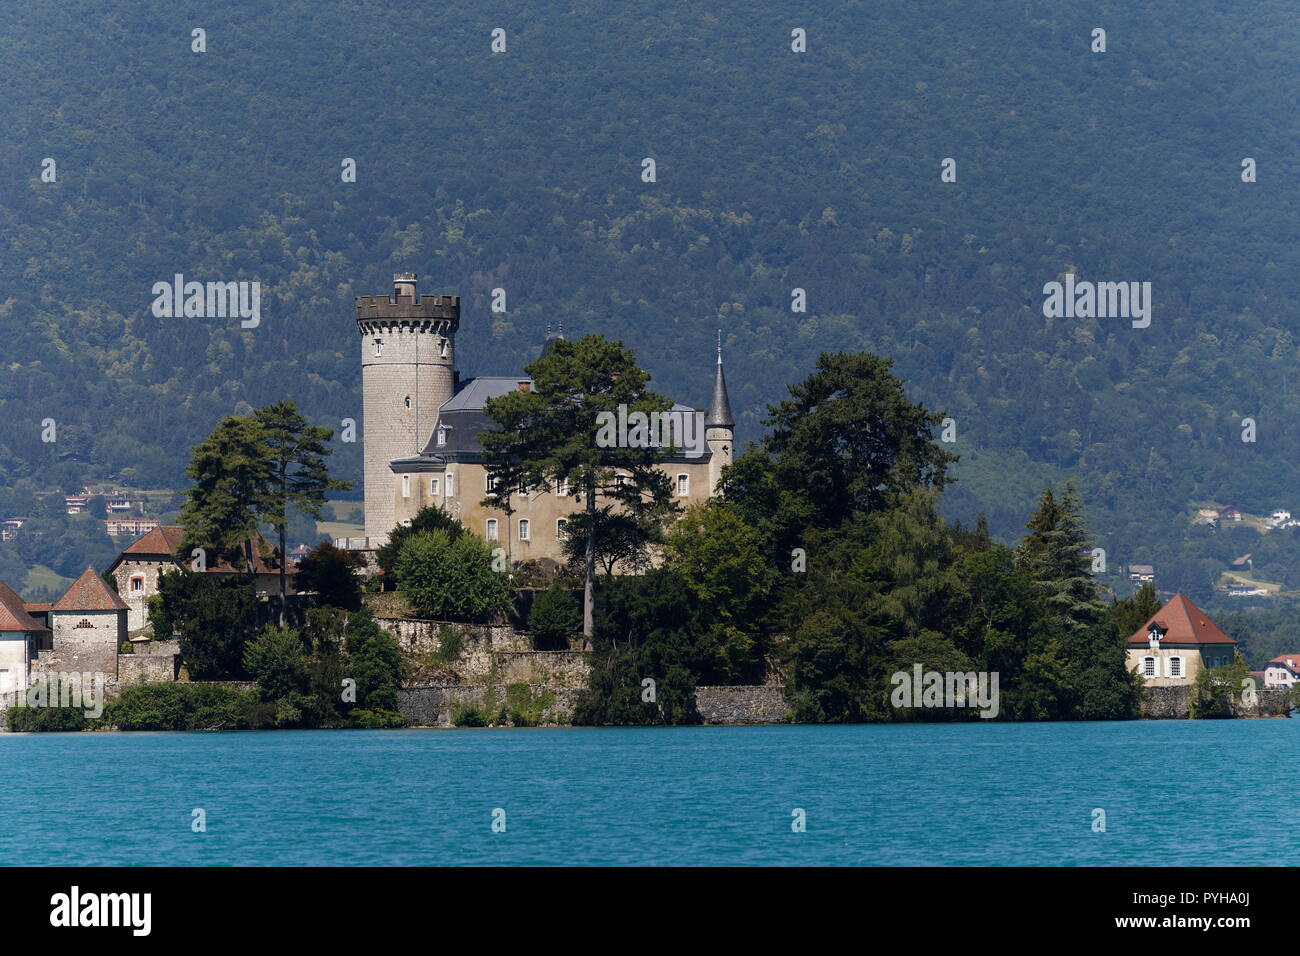 Close up view of Chateau de Duingt on Lake Annecy France Stock Photo